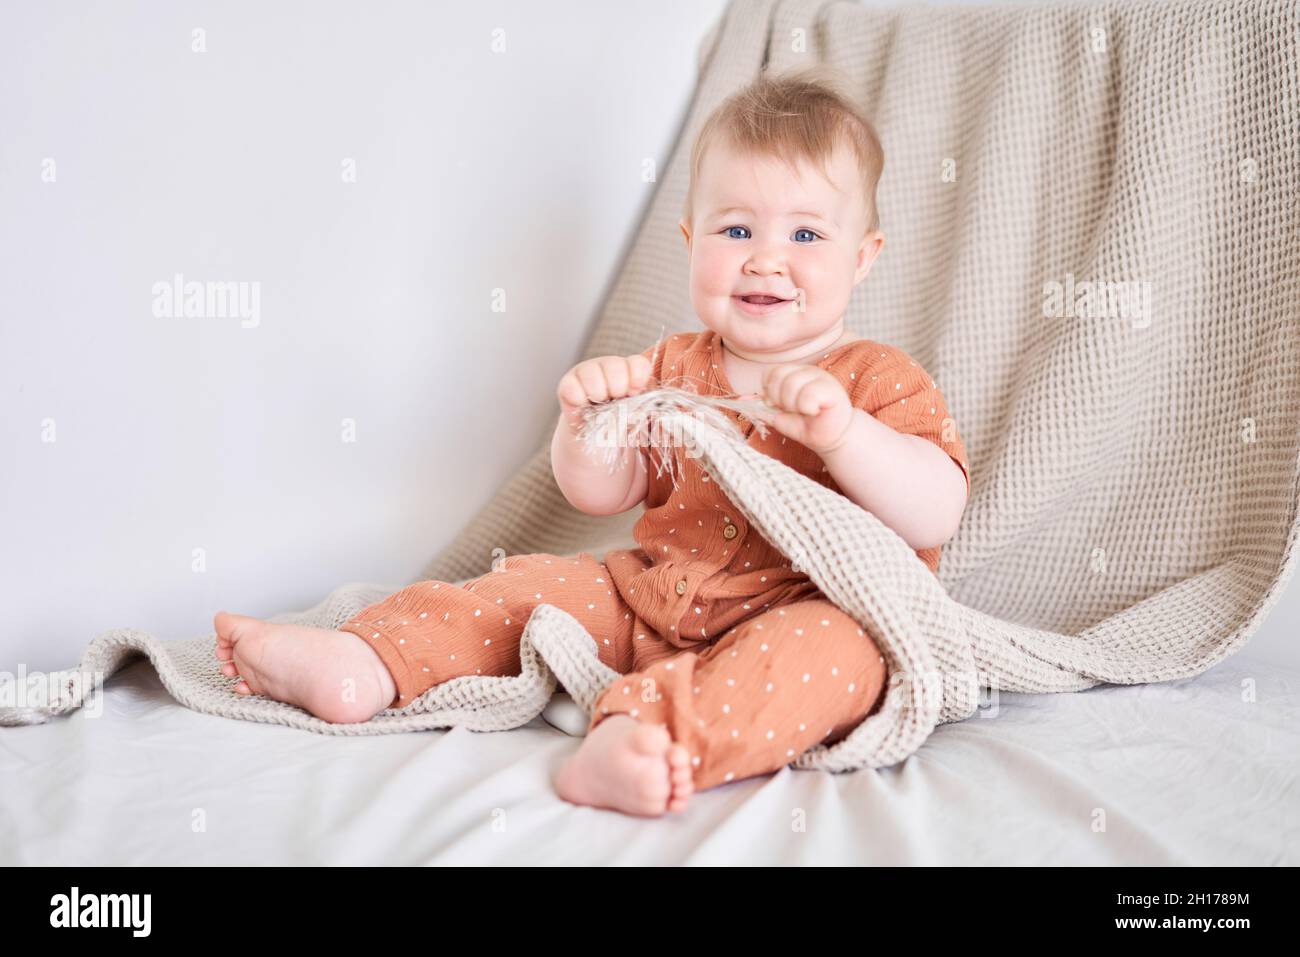 Portrait of a cute 9 months old baby girl seating on a bed. Stock Photo